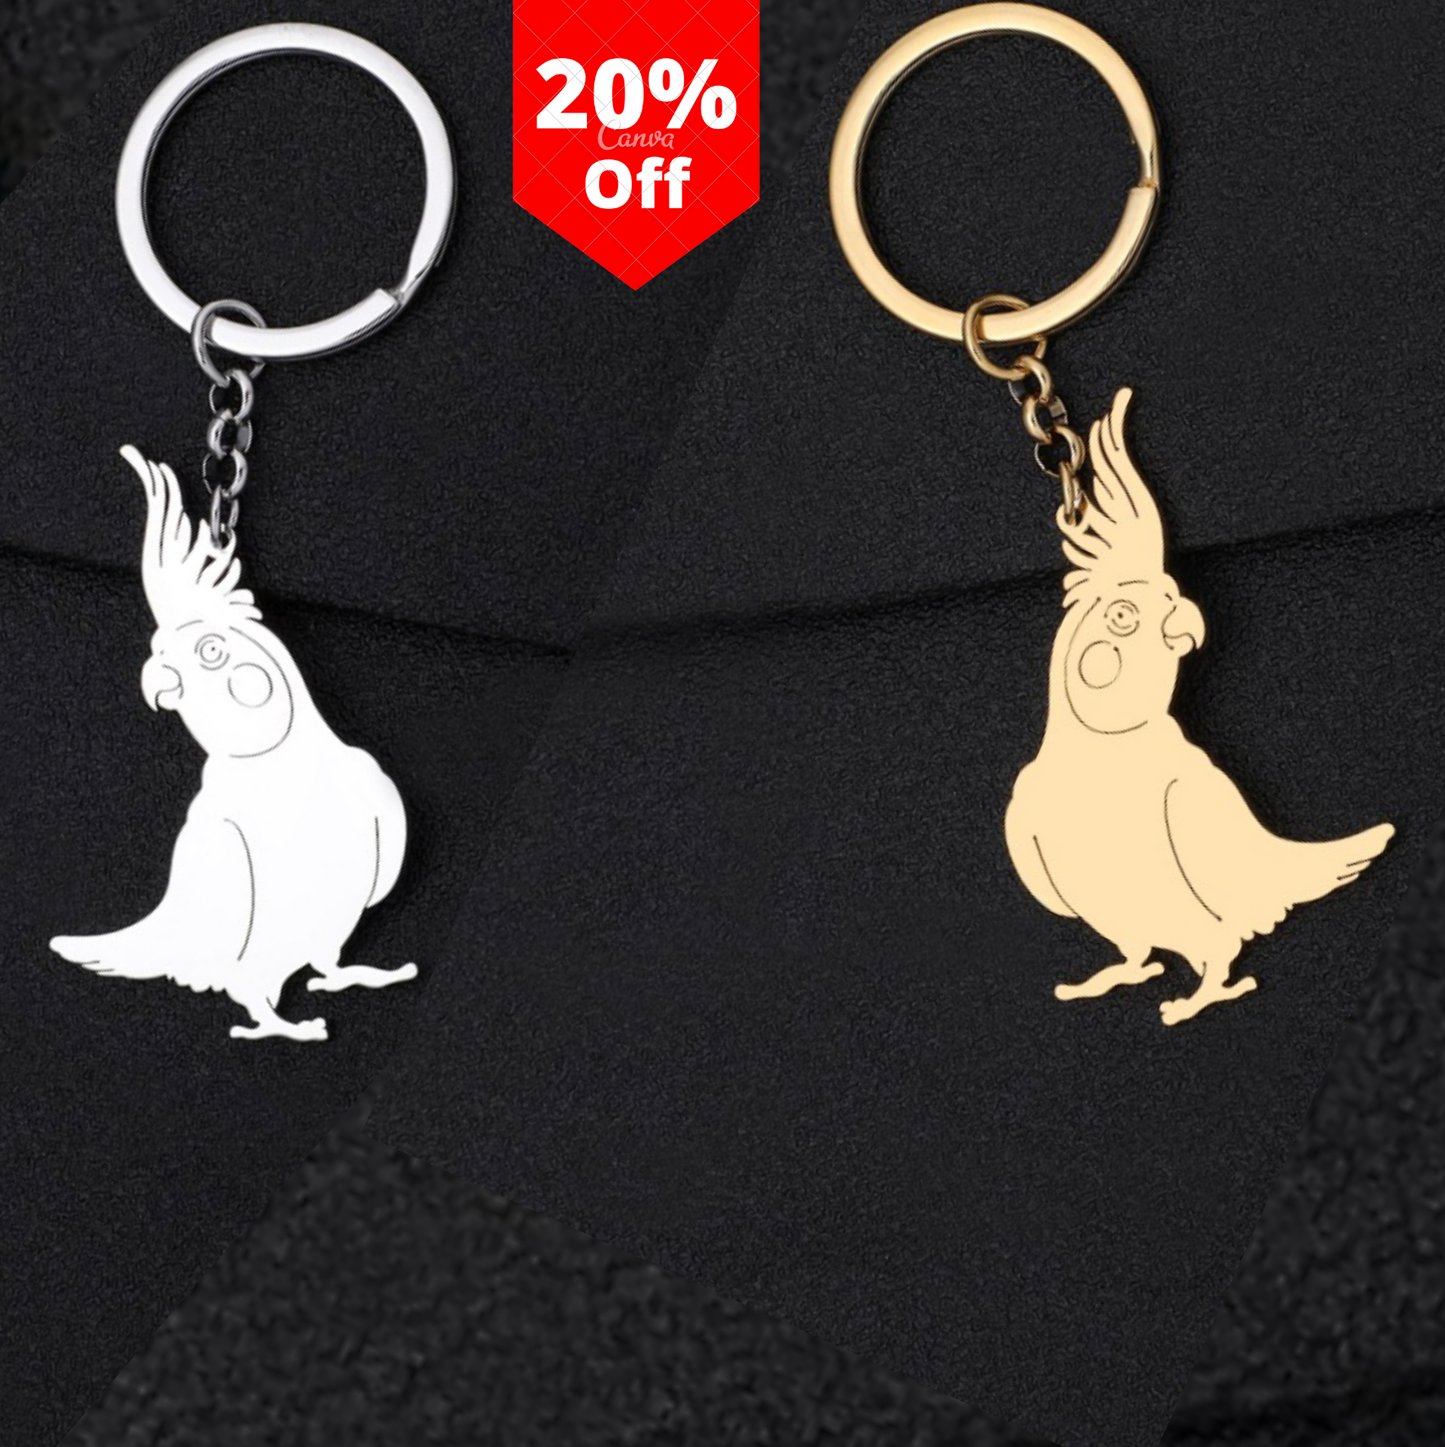 Stainless Steel Cockatiel Keychain - Style's Bug Both keychains (20% OFF)